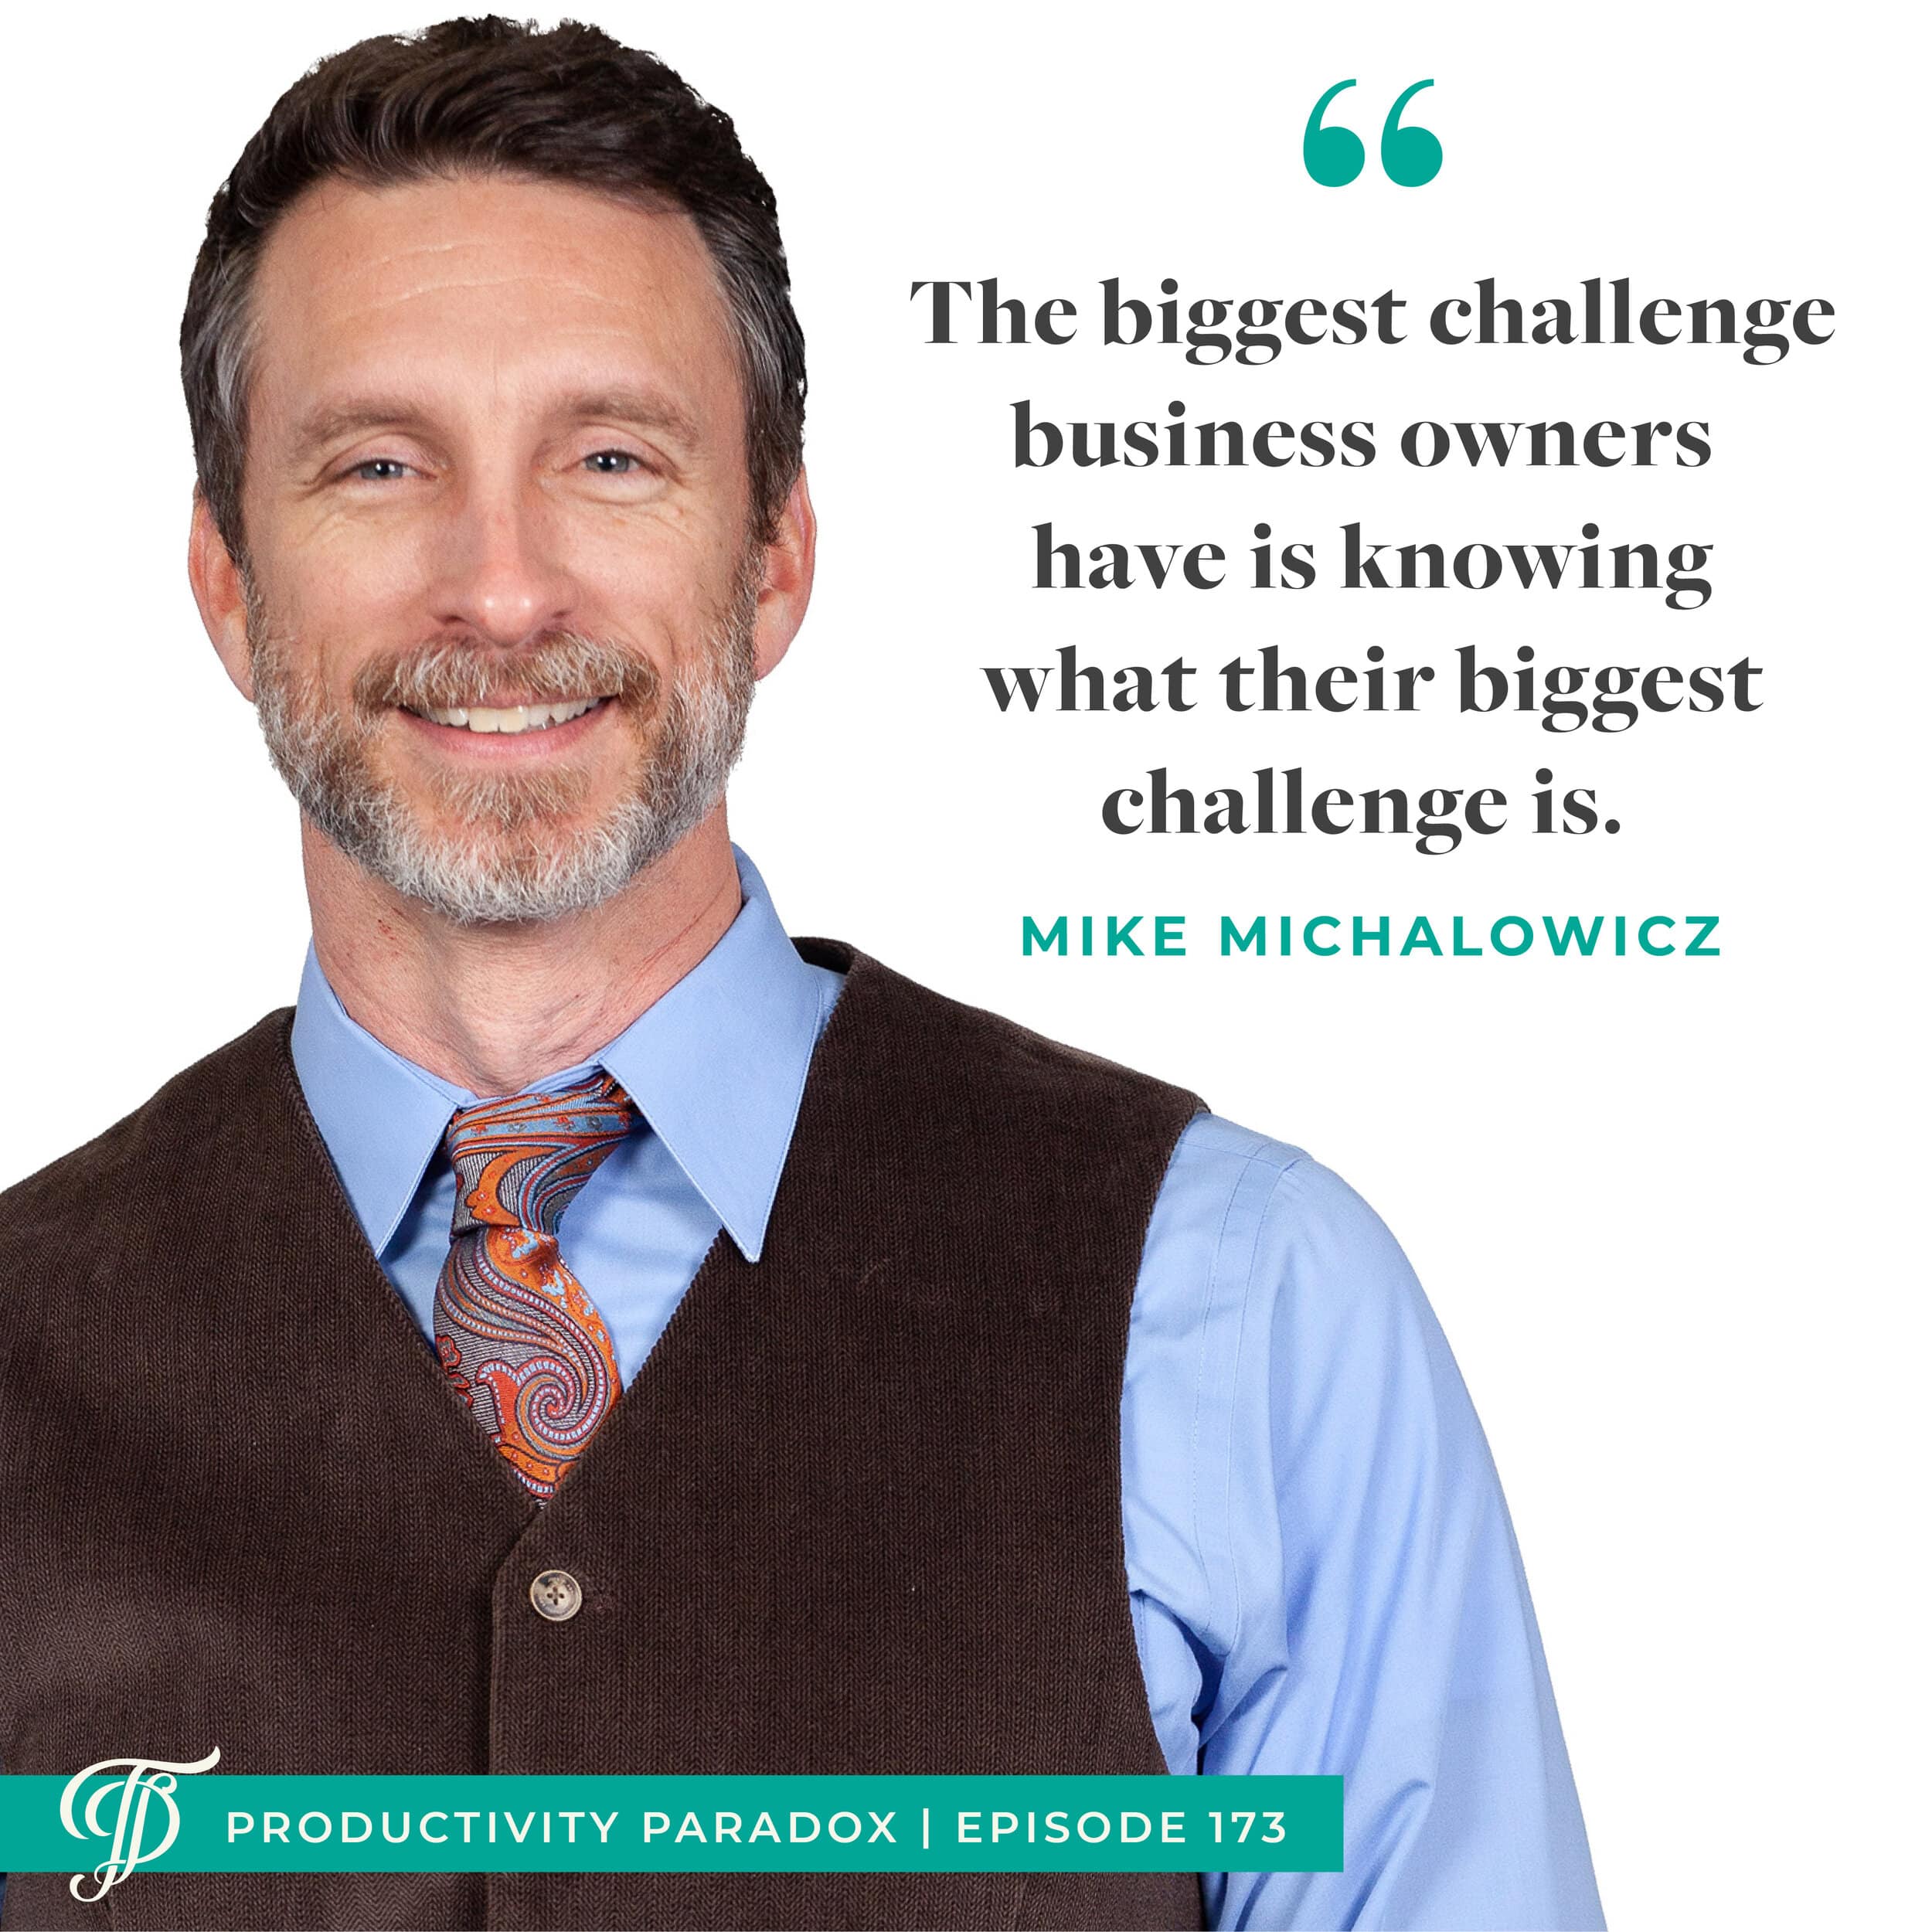 Mike Michalowicz podcast interview on The Intentional Advantage